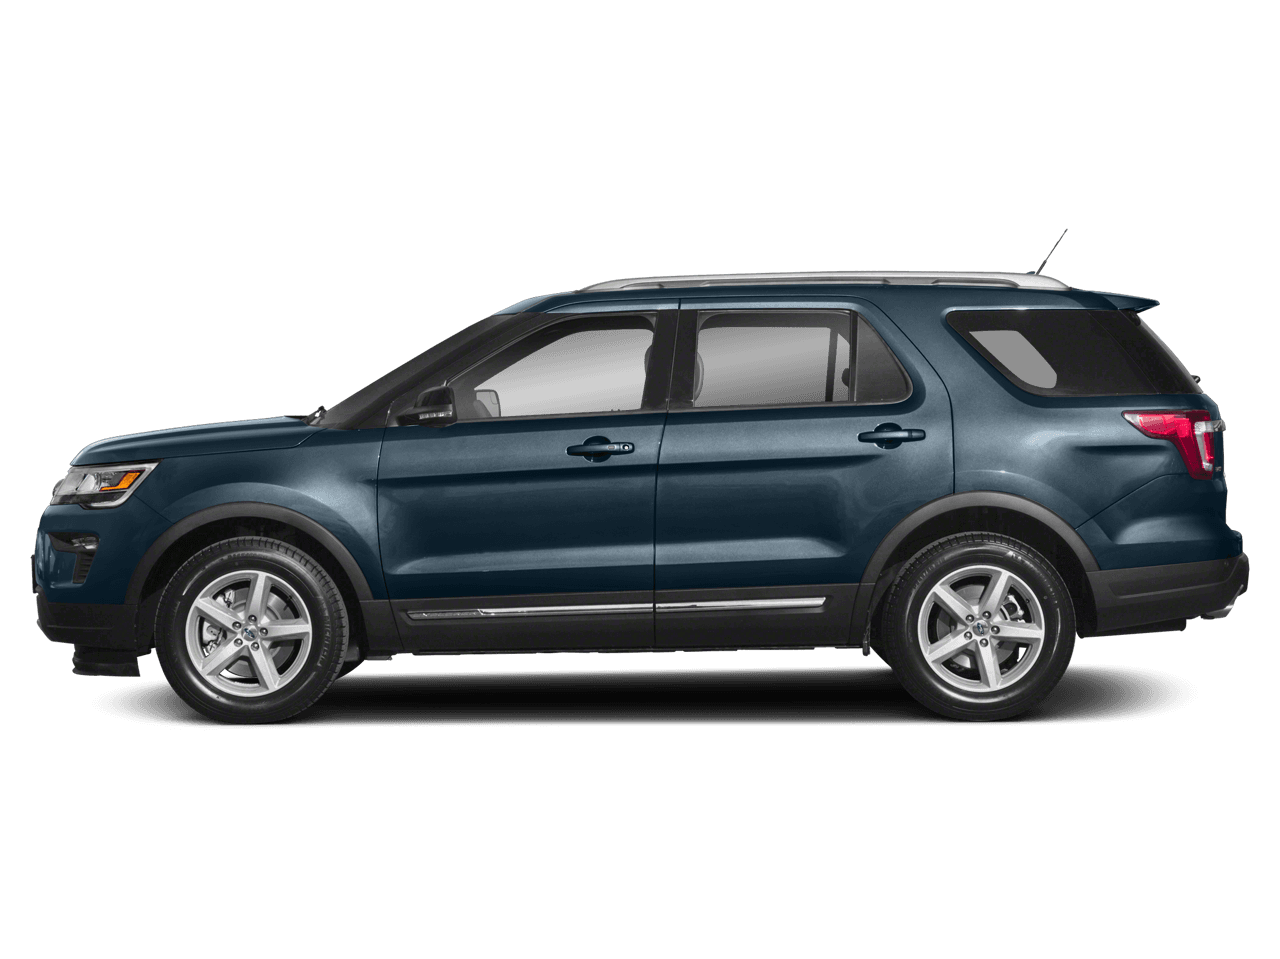 2019 Ford Explorer Photo in Wooster, OH 44691